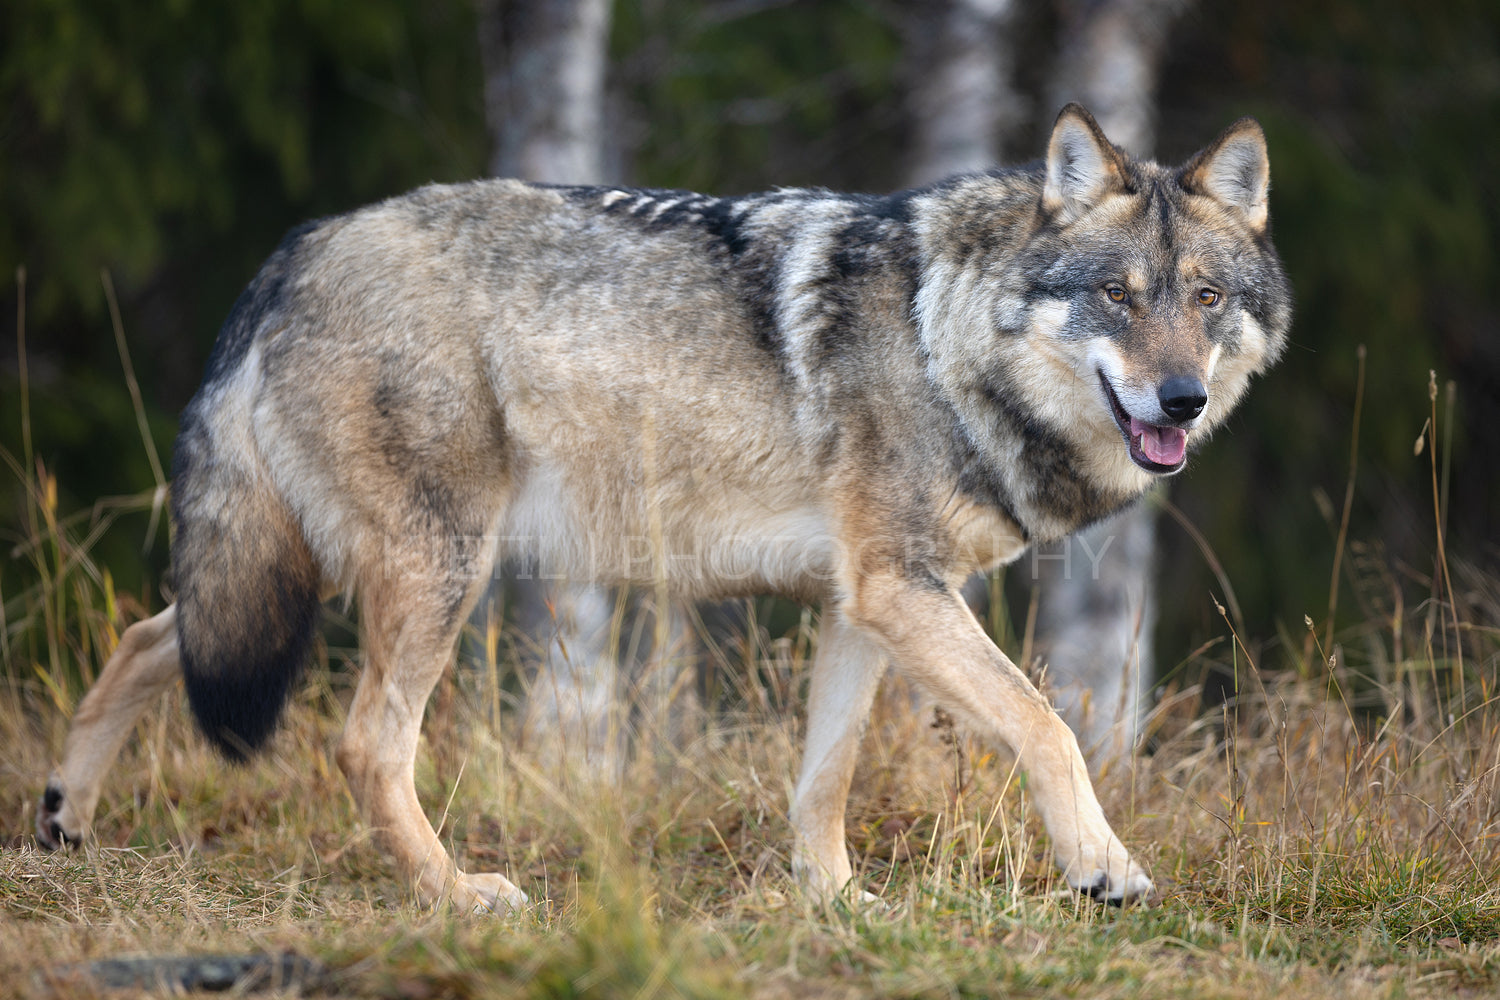 Profile of large male grey wolf walking on a hill in the forest